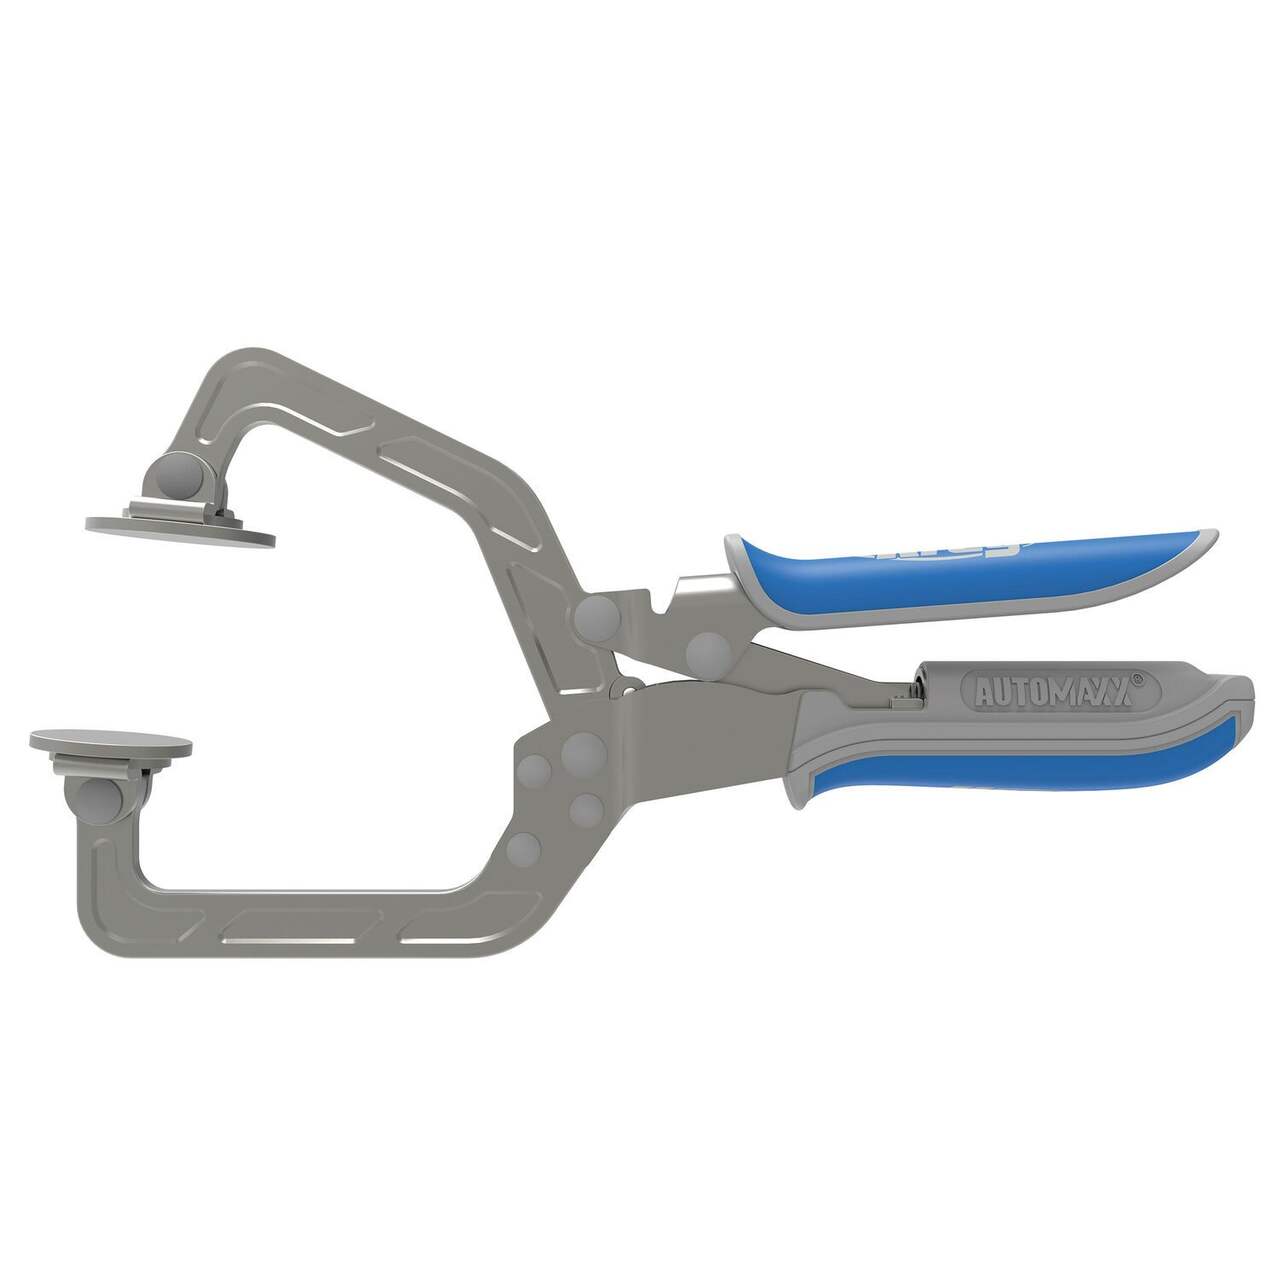 Kreg Wood Project Clamp, 3-in